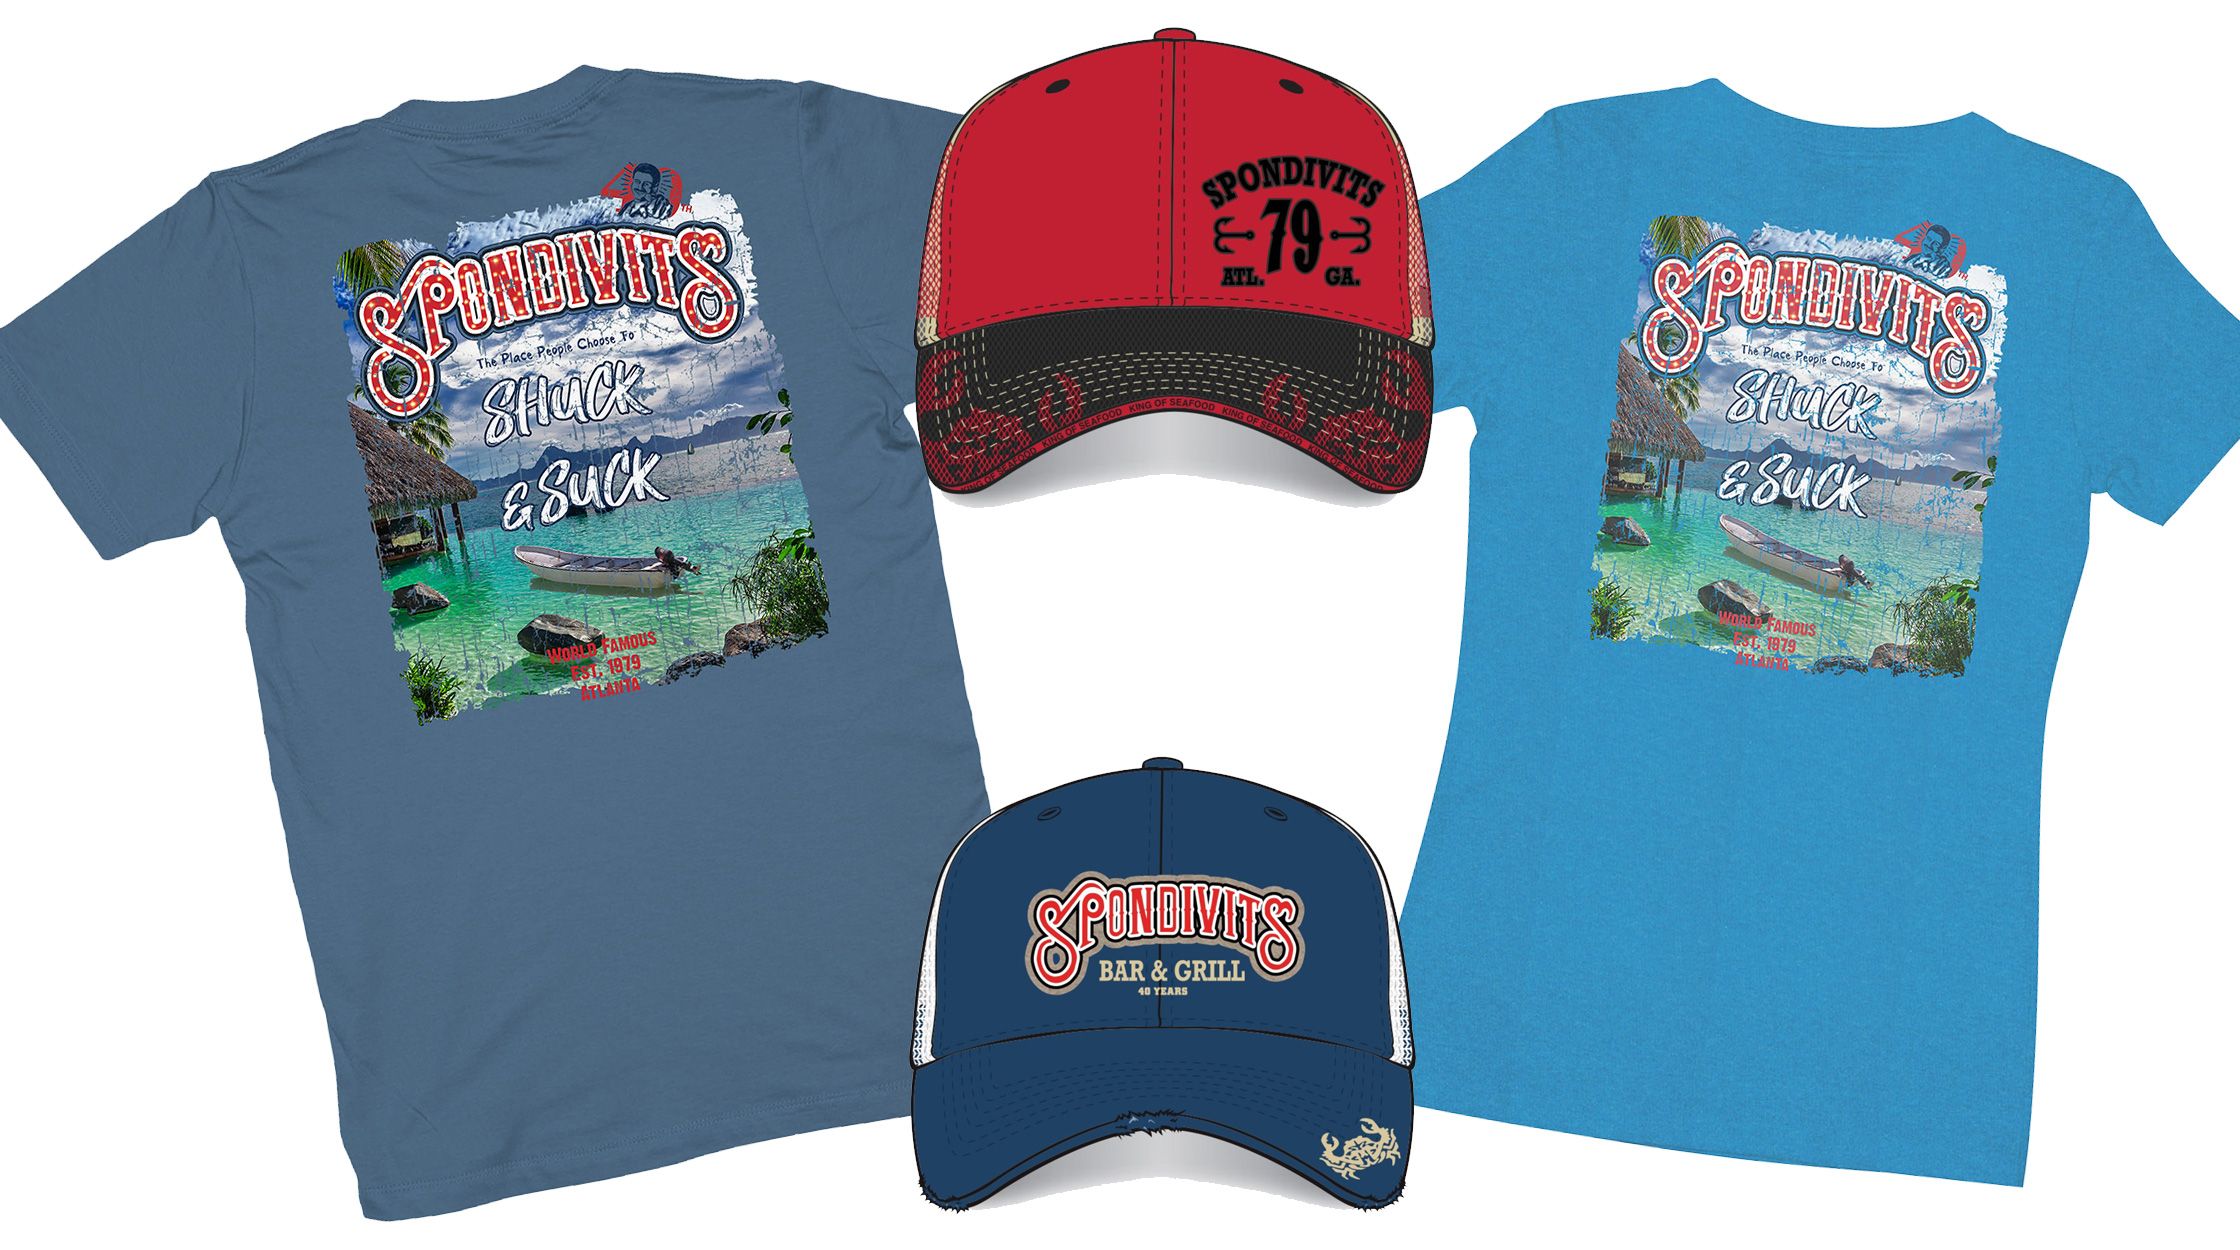 Celebrate 40 years of Spondivits greatness with our all new shirts and hats